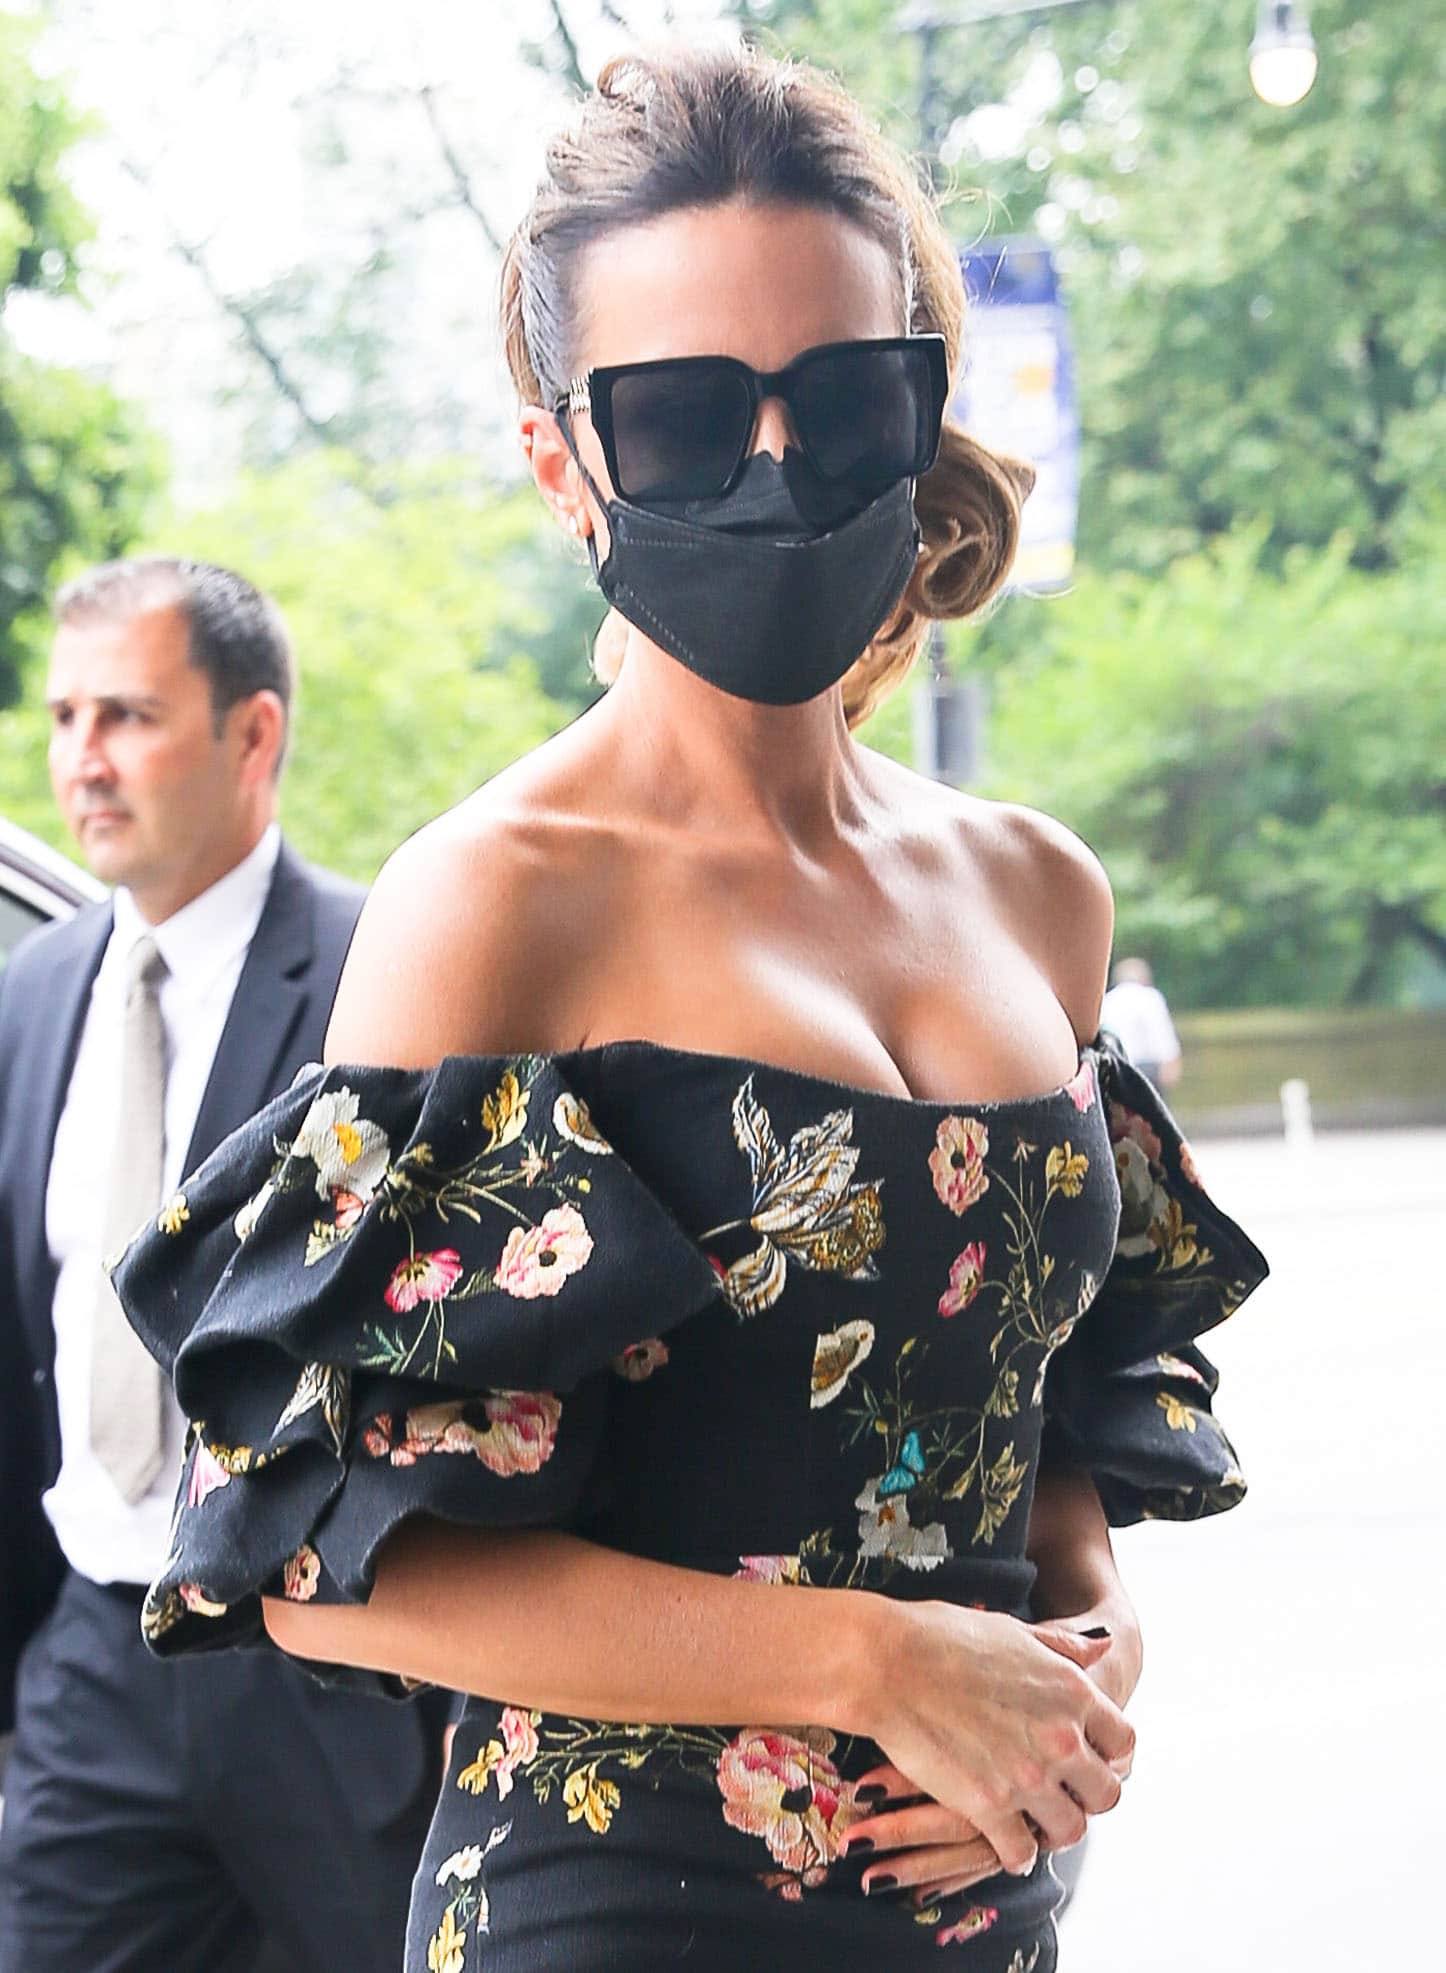 Kate Beckinsale accessorizes with stud earrings, square-framed sunglasses, and a black face mask